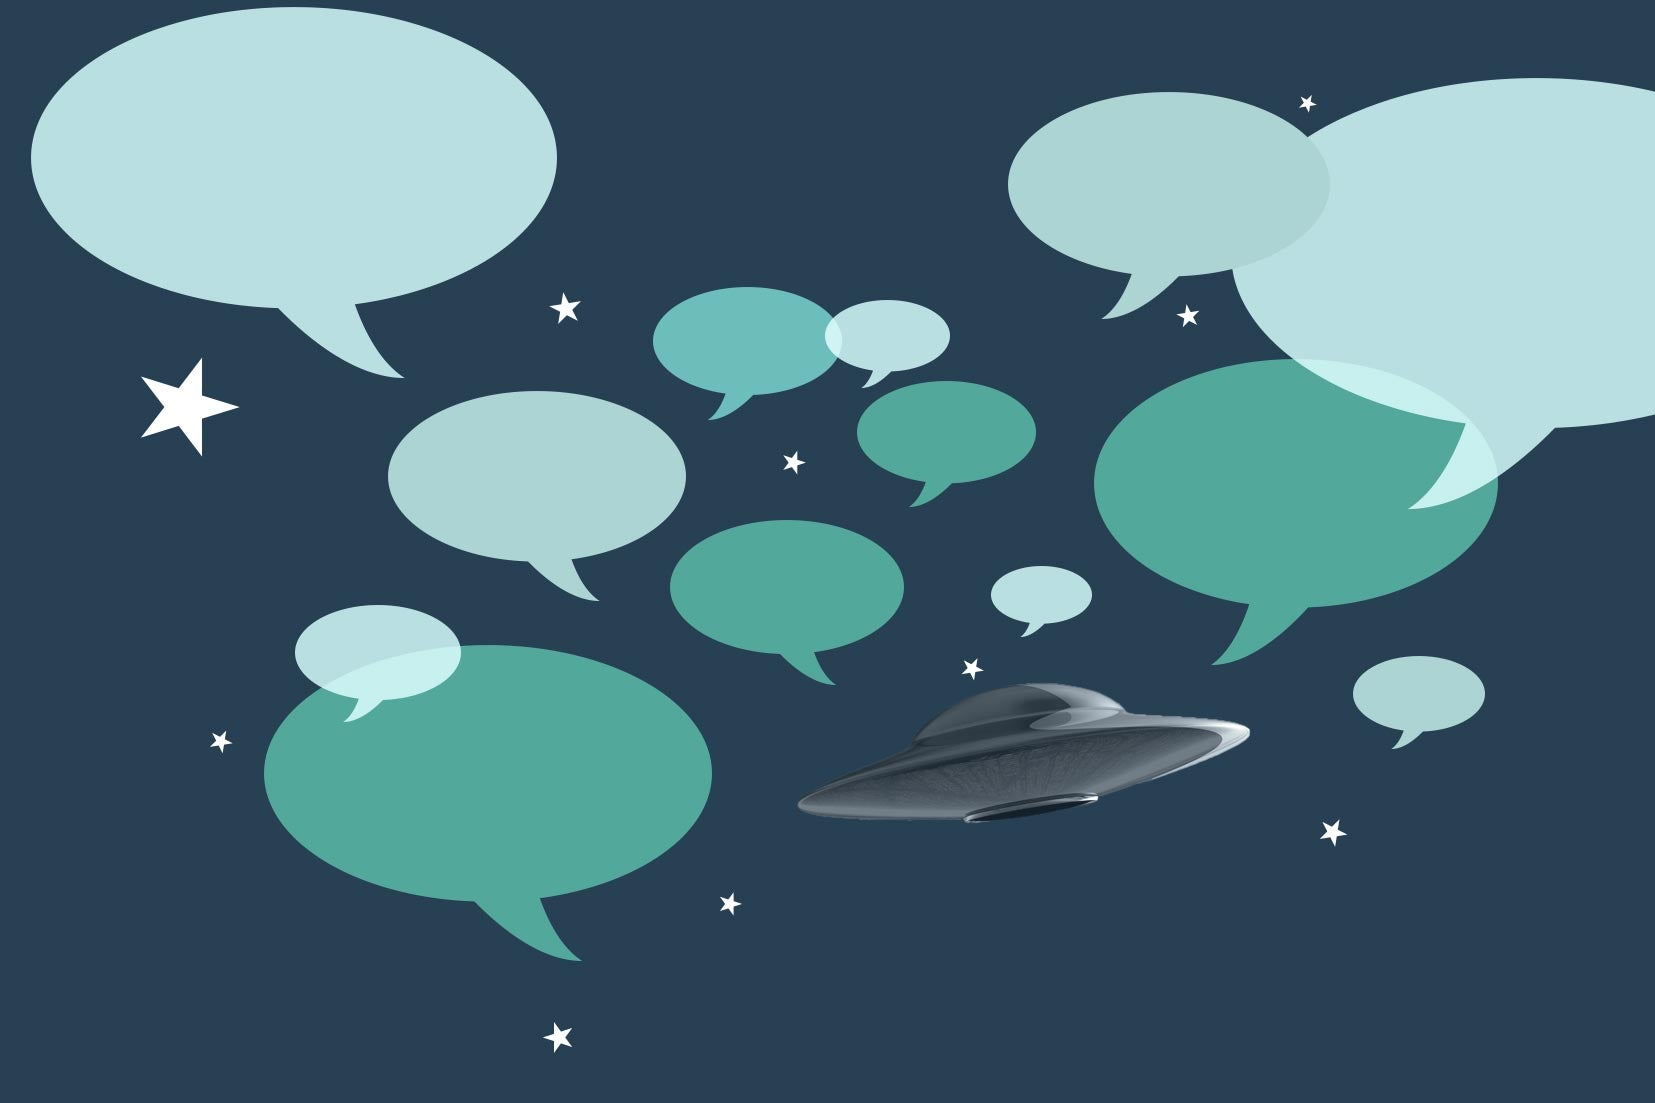 Speech bubbles surrounding a flying saucer in space